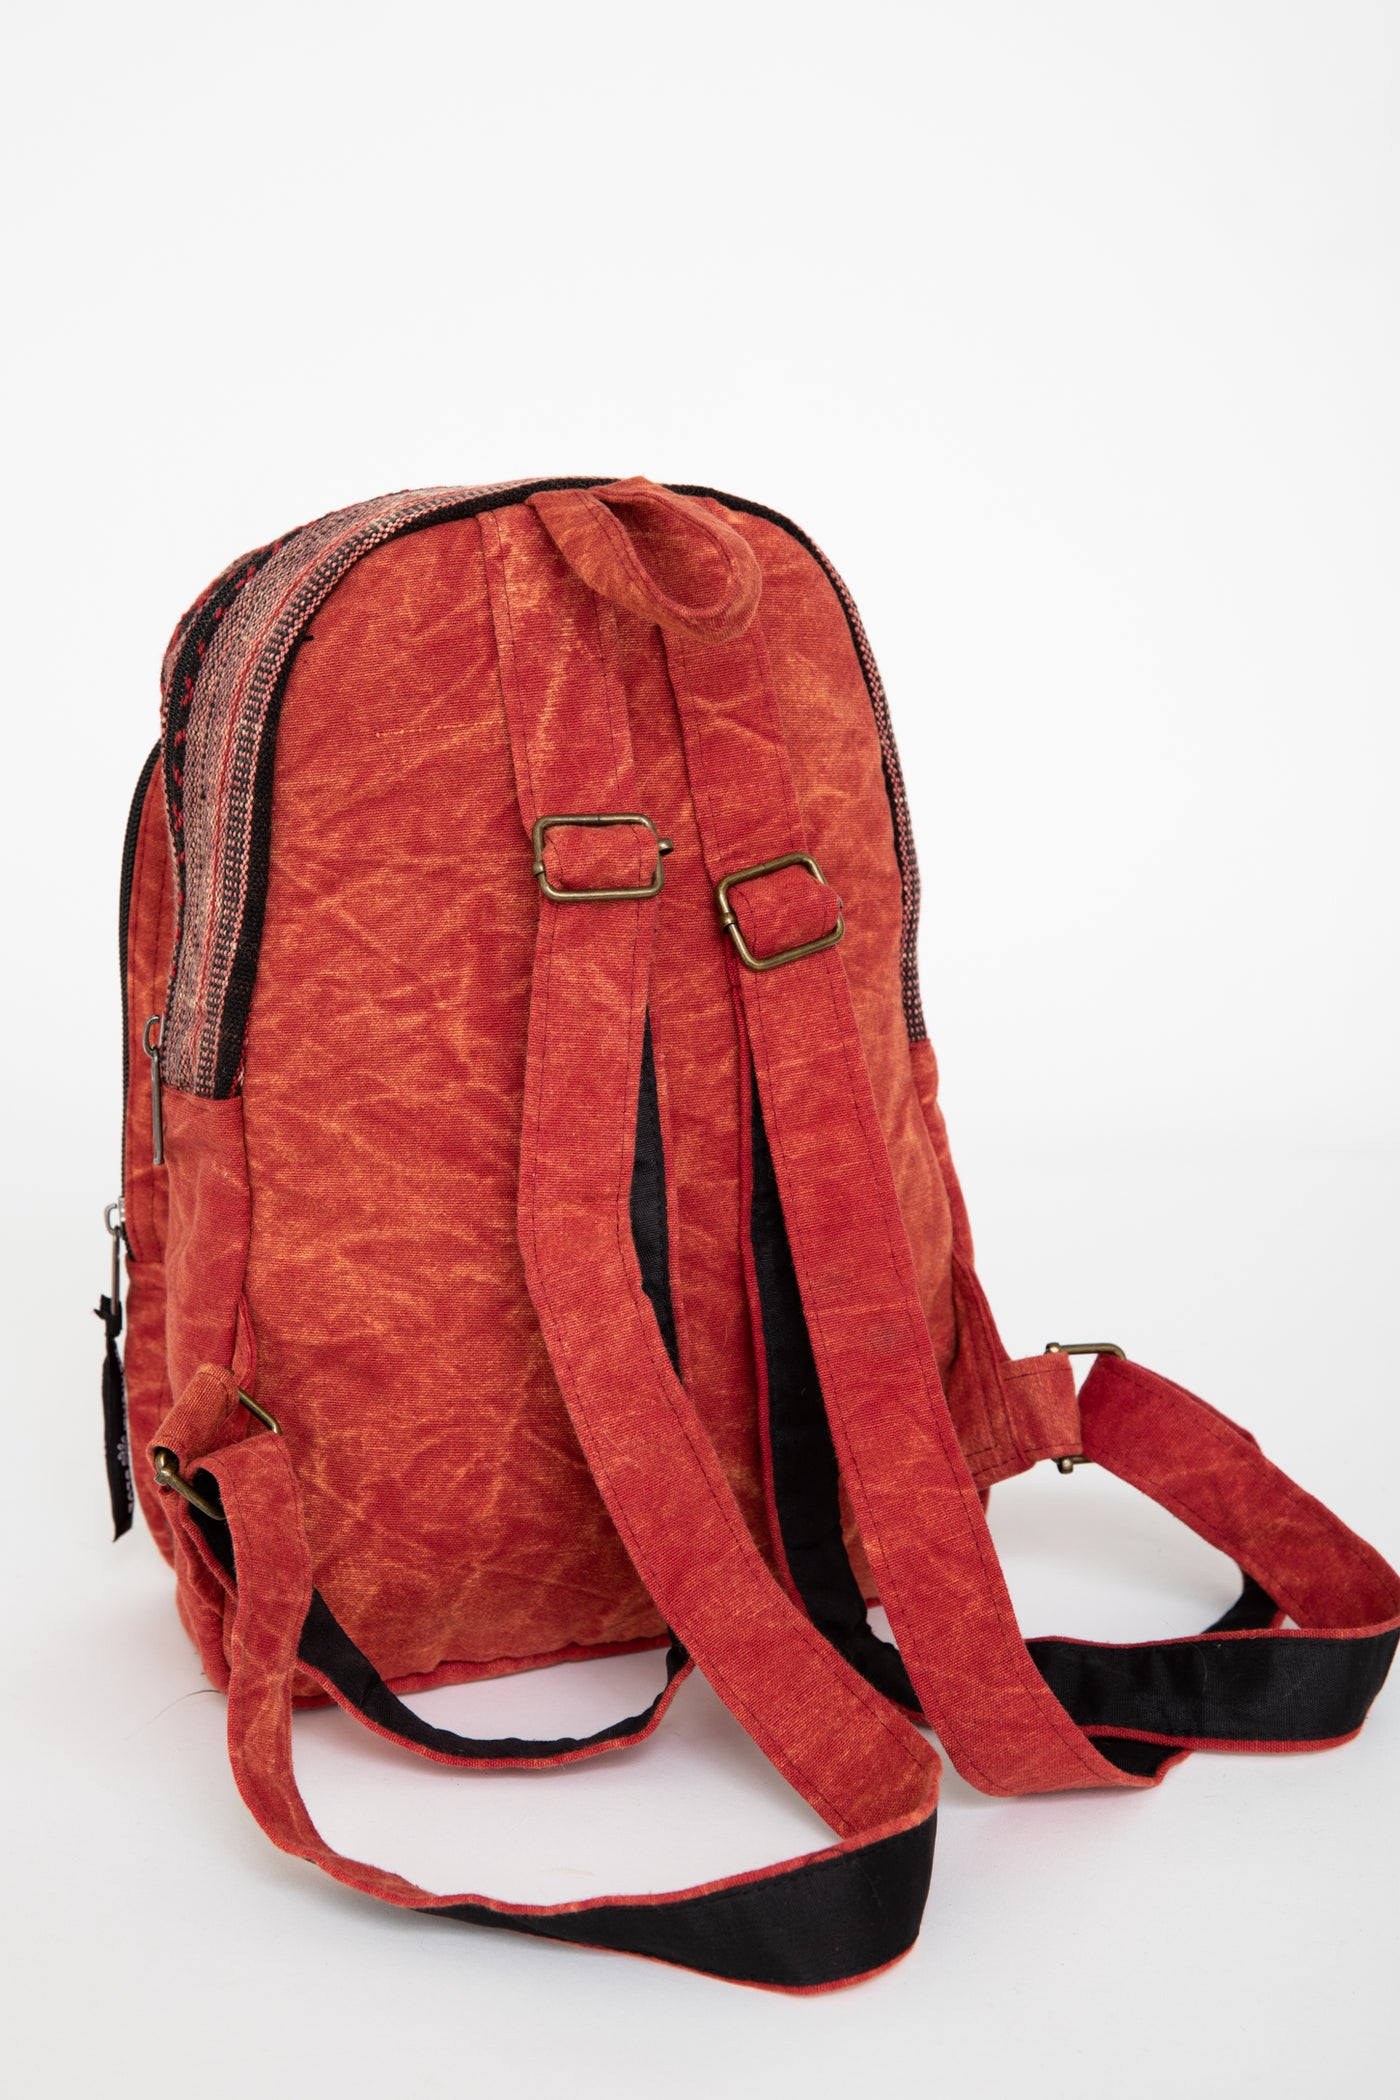 Gherry Colorful Daypack